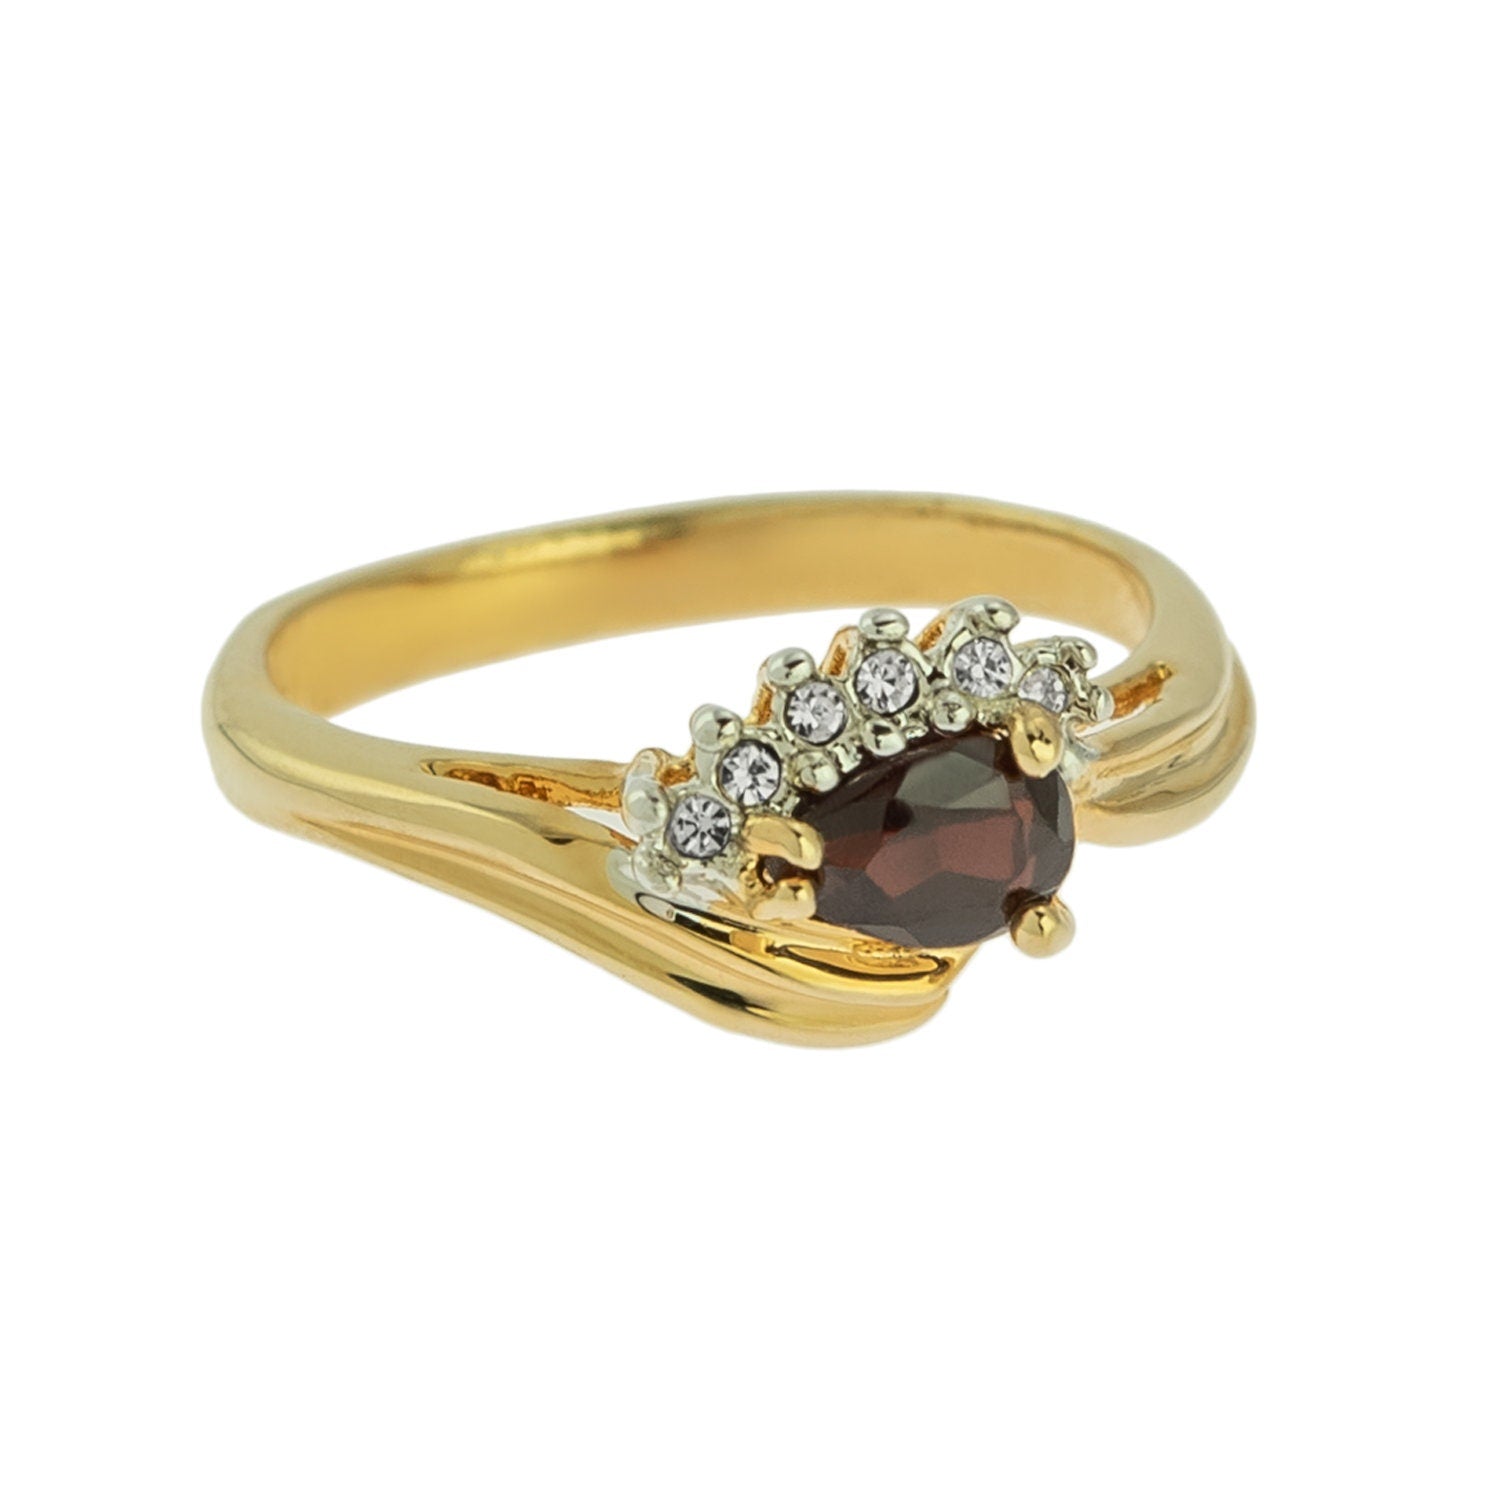 Vintage Ring Genuine Garnet and Clear Swarovski Crystals 18kt Gold Womans Antique Jewelry #R2945 - Limited Stock - Never Worn